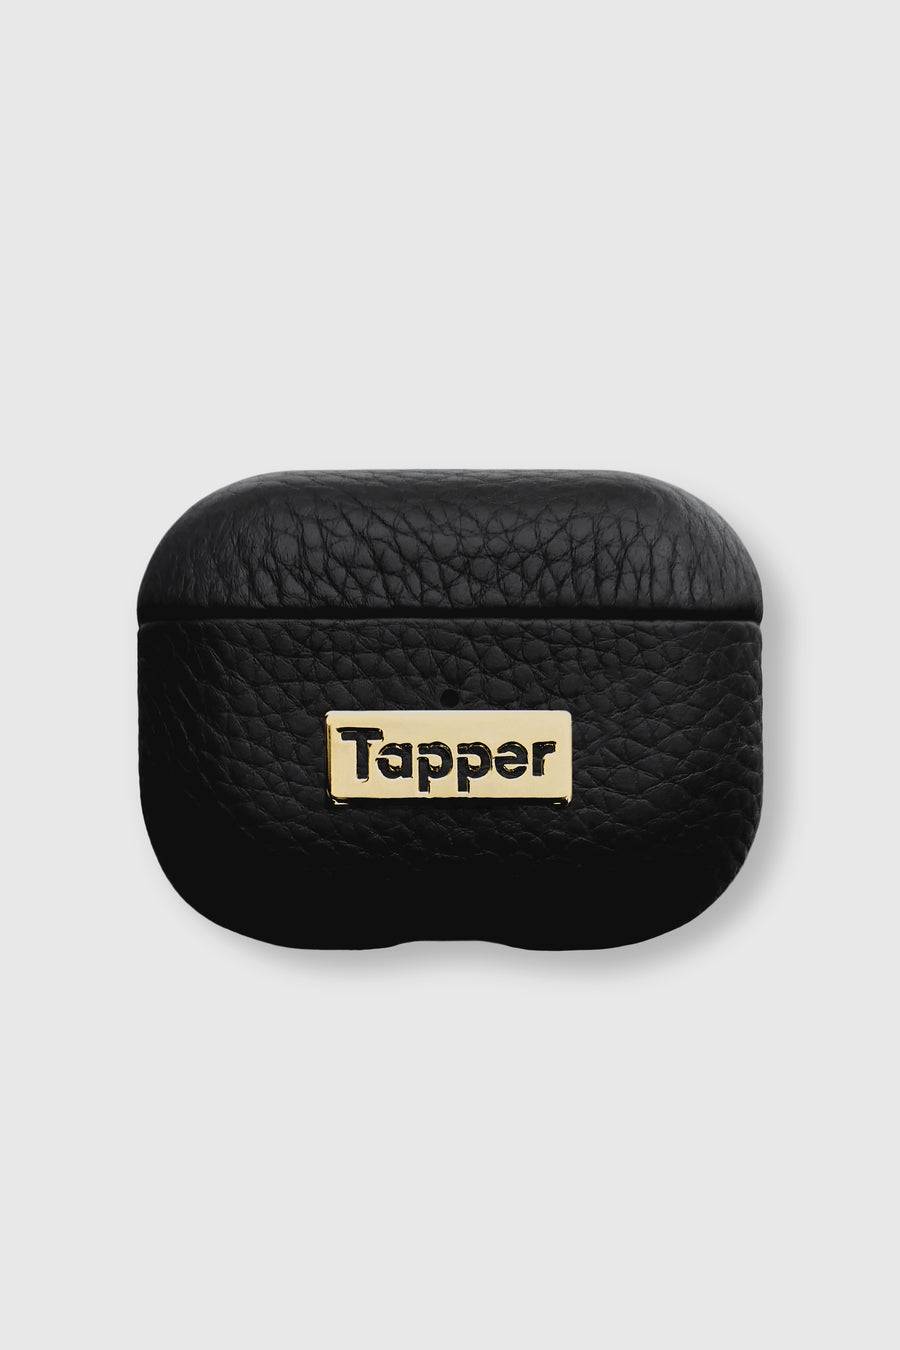 Tapper's luxurious black genuine lamb leather AirPods case protects and elevates the look of your AirPods Pro. The luxurious, protective case for AirPods Pro with a metal logo plate in real 18k gold plating steps up your AirPods game. The next must-have high end protective Apple AirPods accessory in real leather and precious metals. Compatible with AirPods Pro. Designed in Sweden by Tapper. Free Express Shipping at gettapper.com